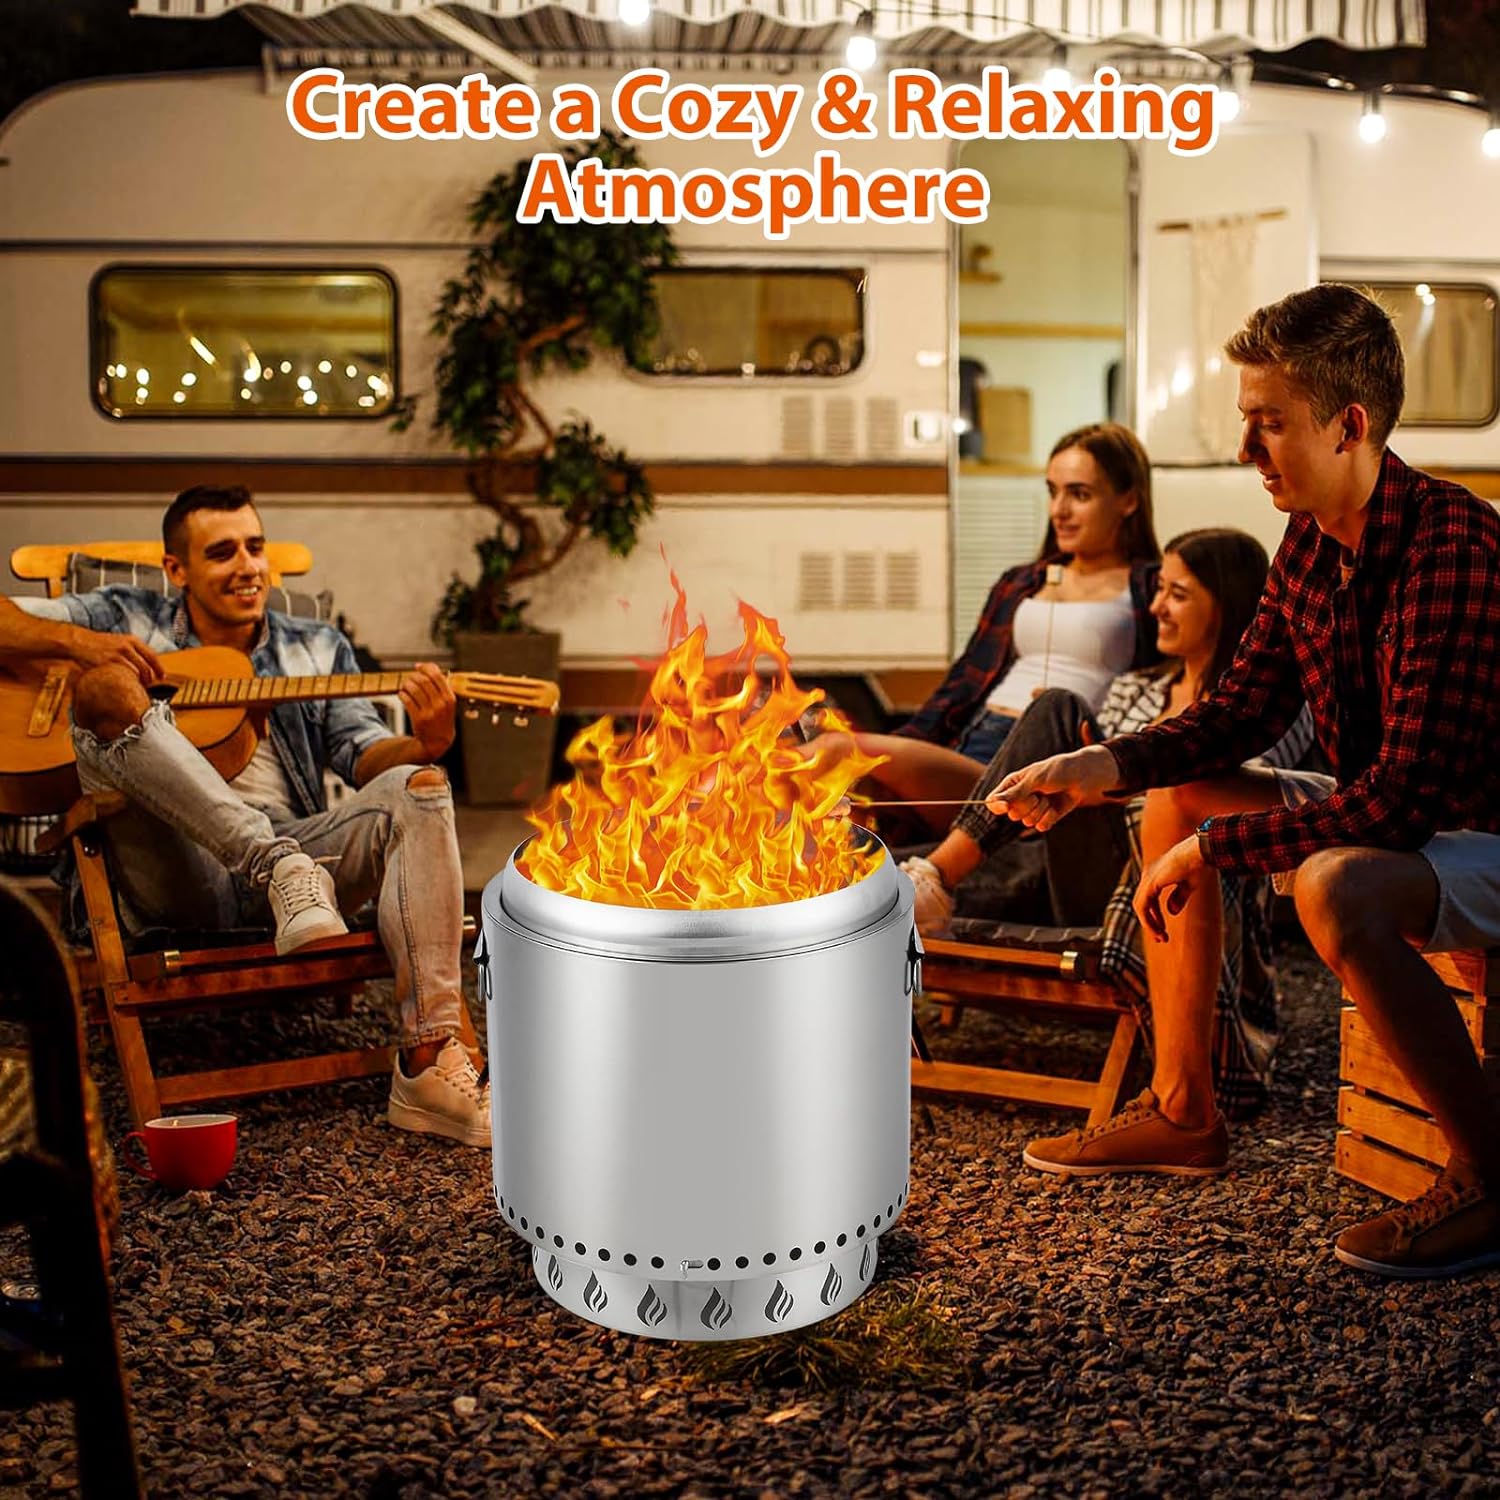 Smokeless Fire Pit, 16.5 Inch Portable Outdoor Firepit, Stainless Metal Steel Wood Burning Fireplaces with Removable Ash Pan and Poker, for Outside Bonfire Backyard Patio Camping